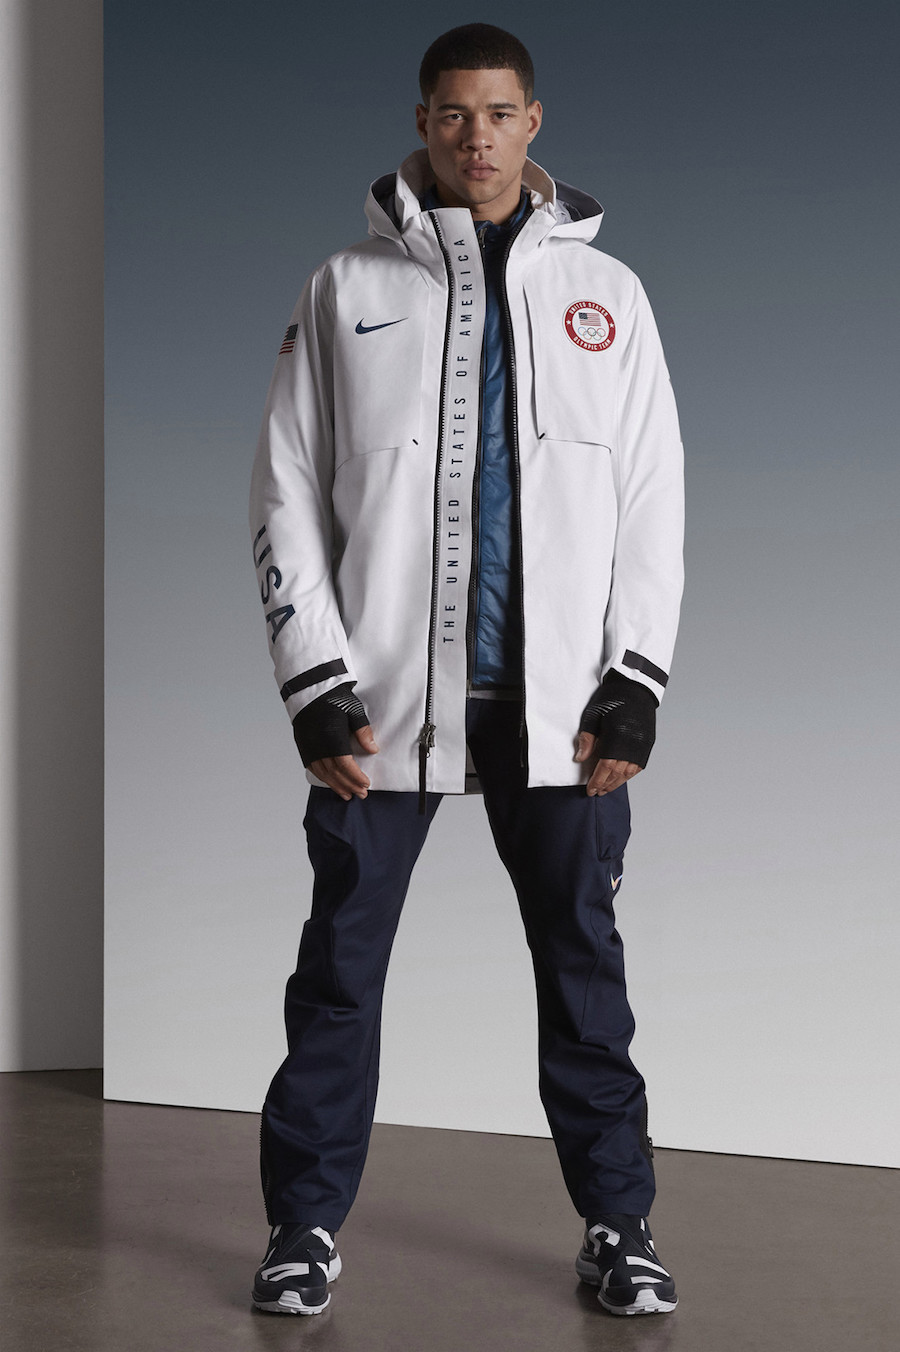 Nike Team USA Medal Stand Collection